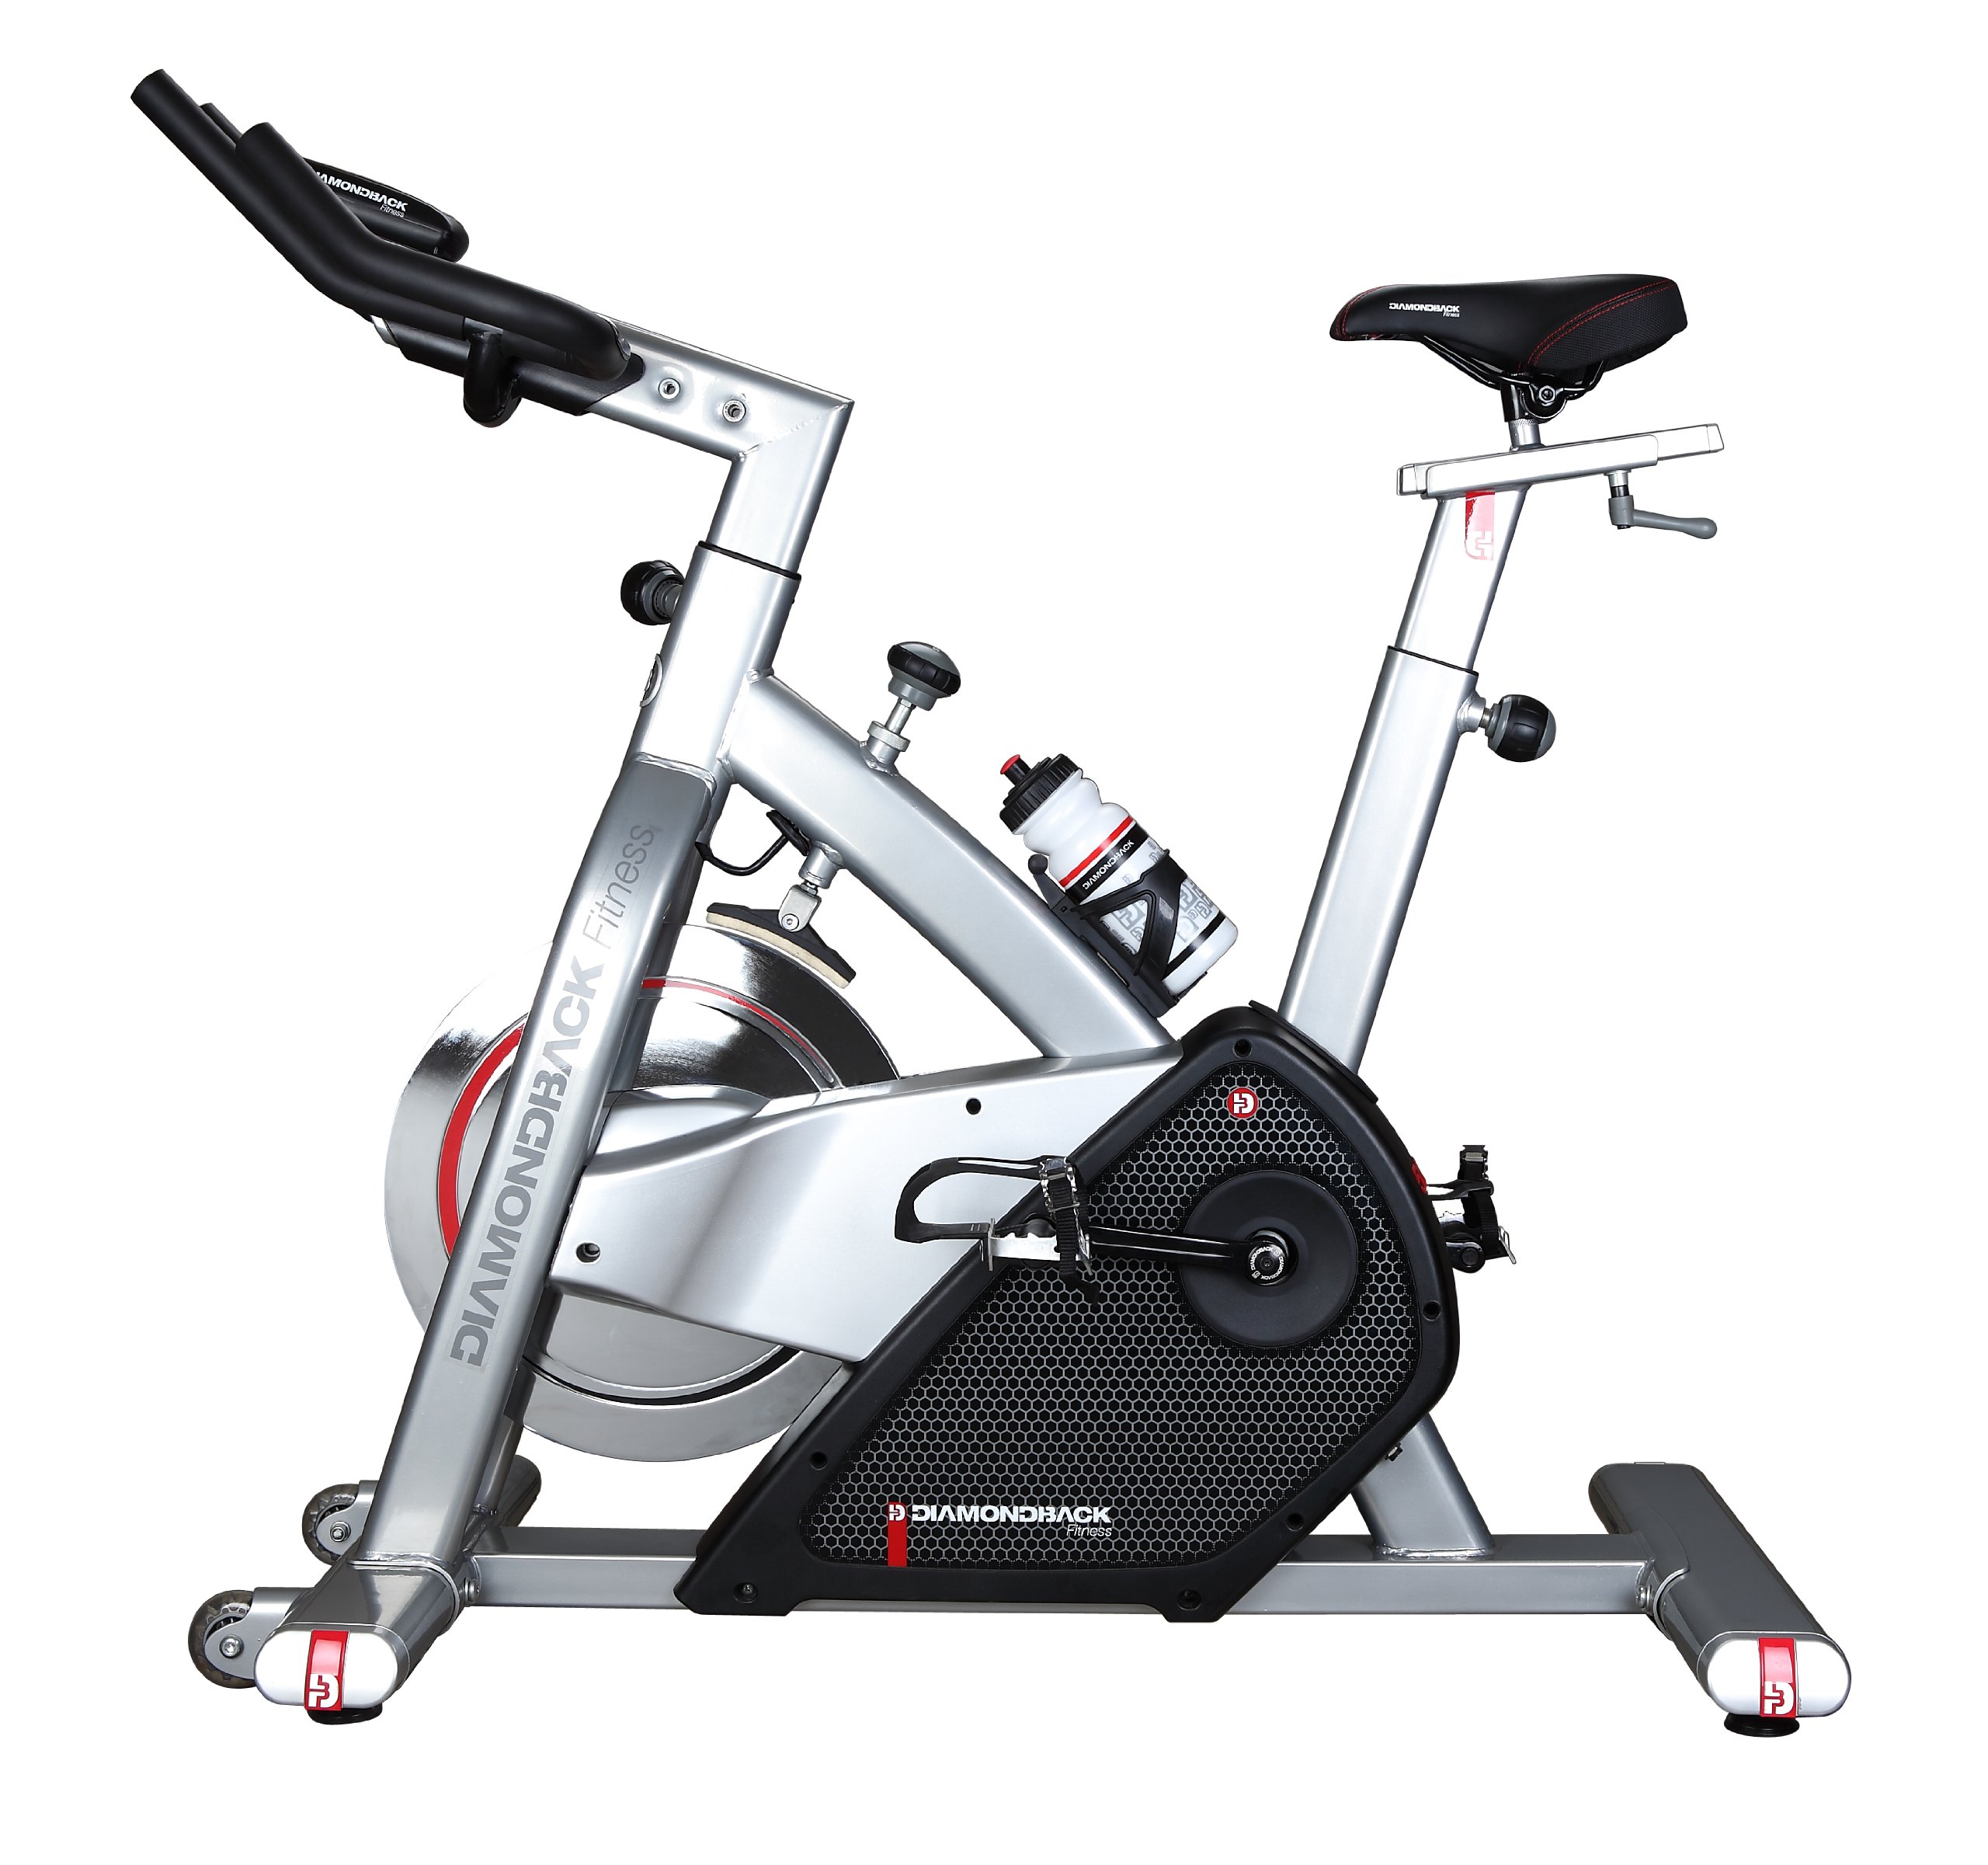 Diamondback Exercise Bike Review: A Blend of Quality and Performance